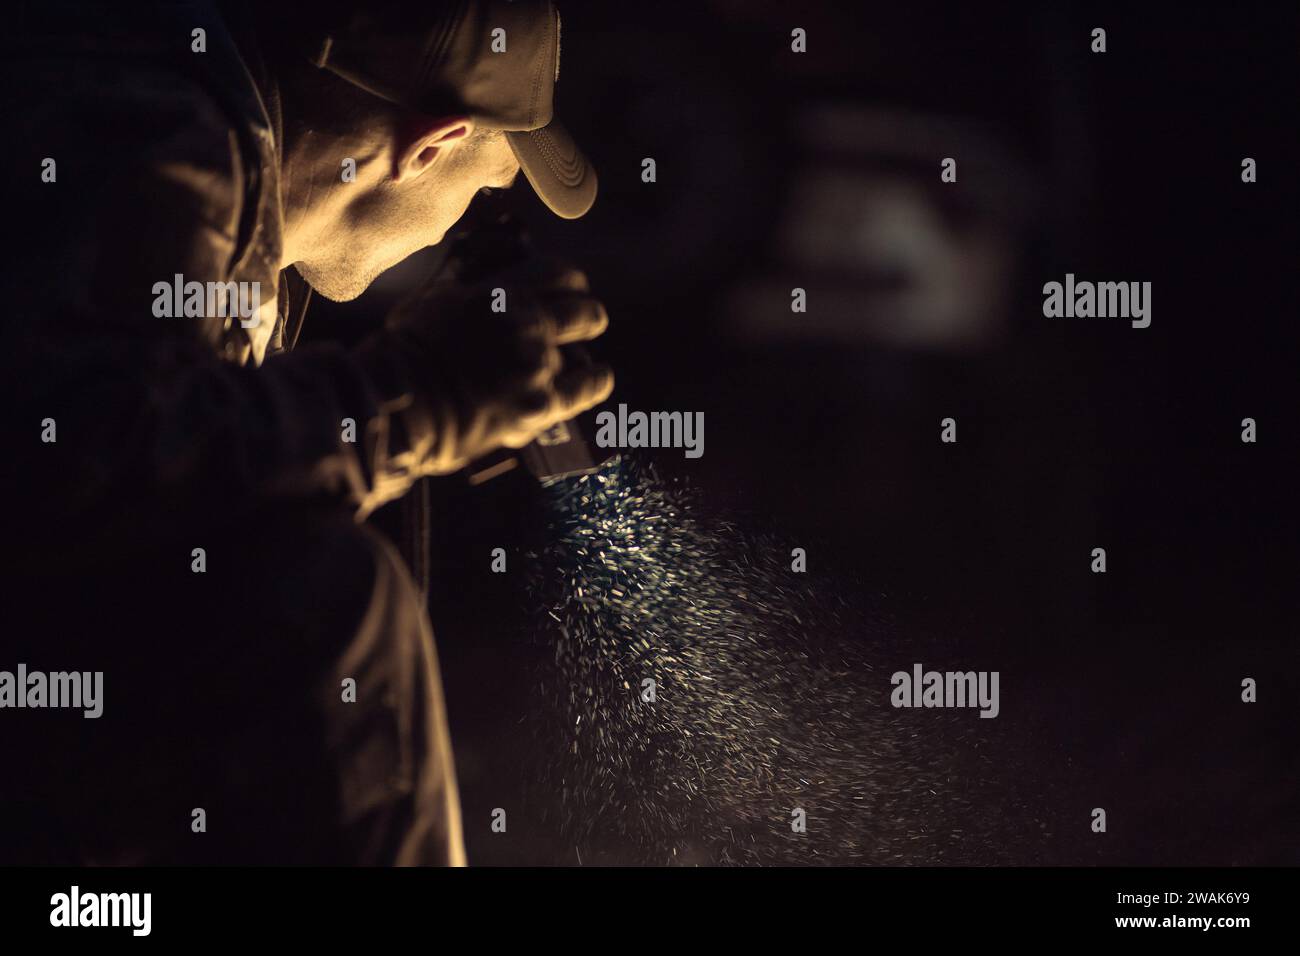 A Man with a Flashlight in His Hand During Night Time Hours Looking For Something. Stock Photo